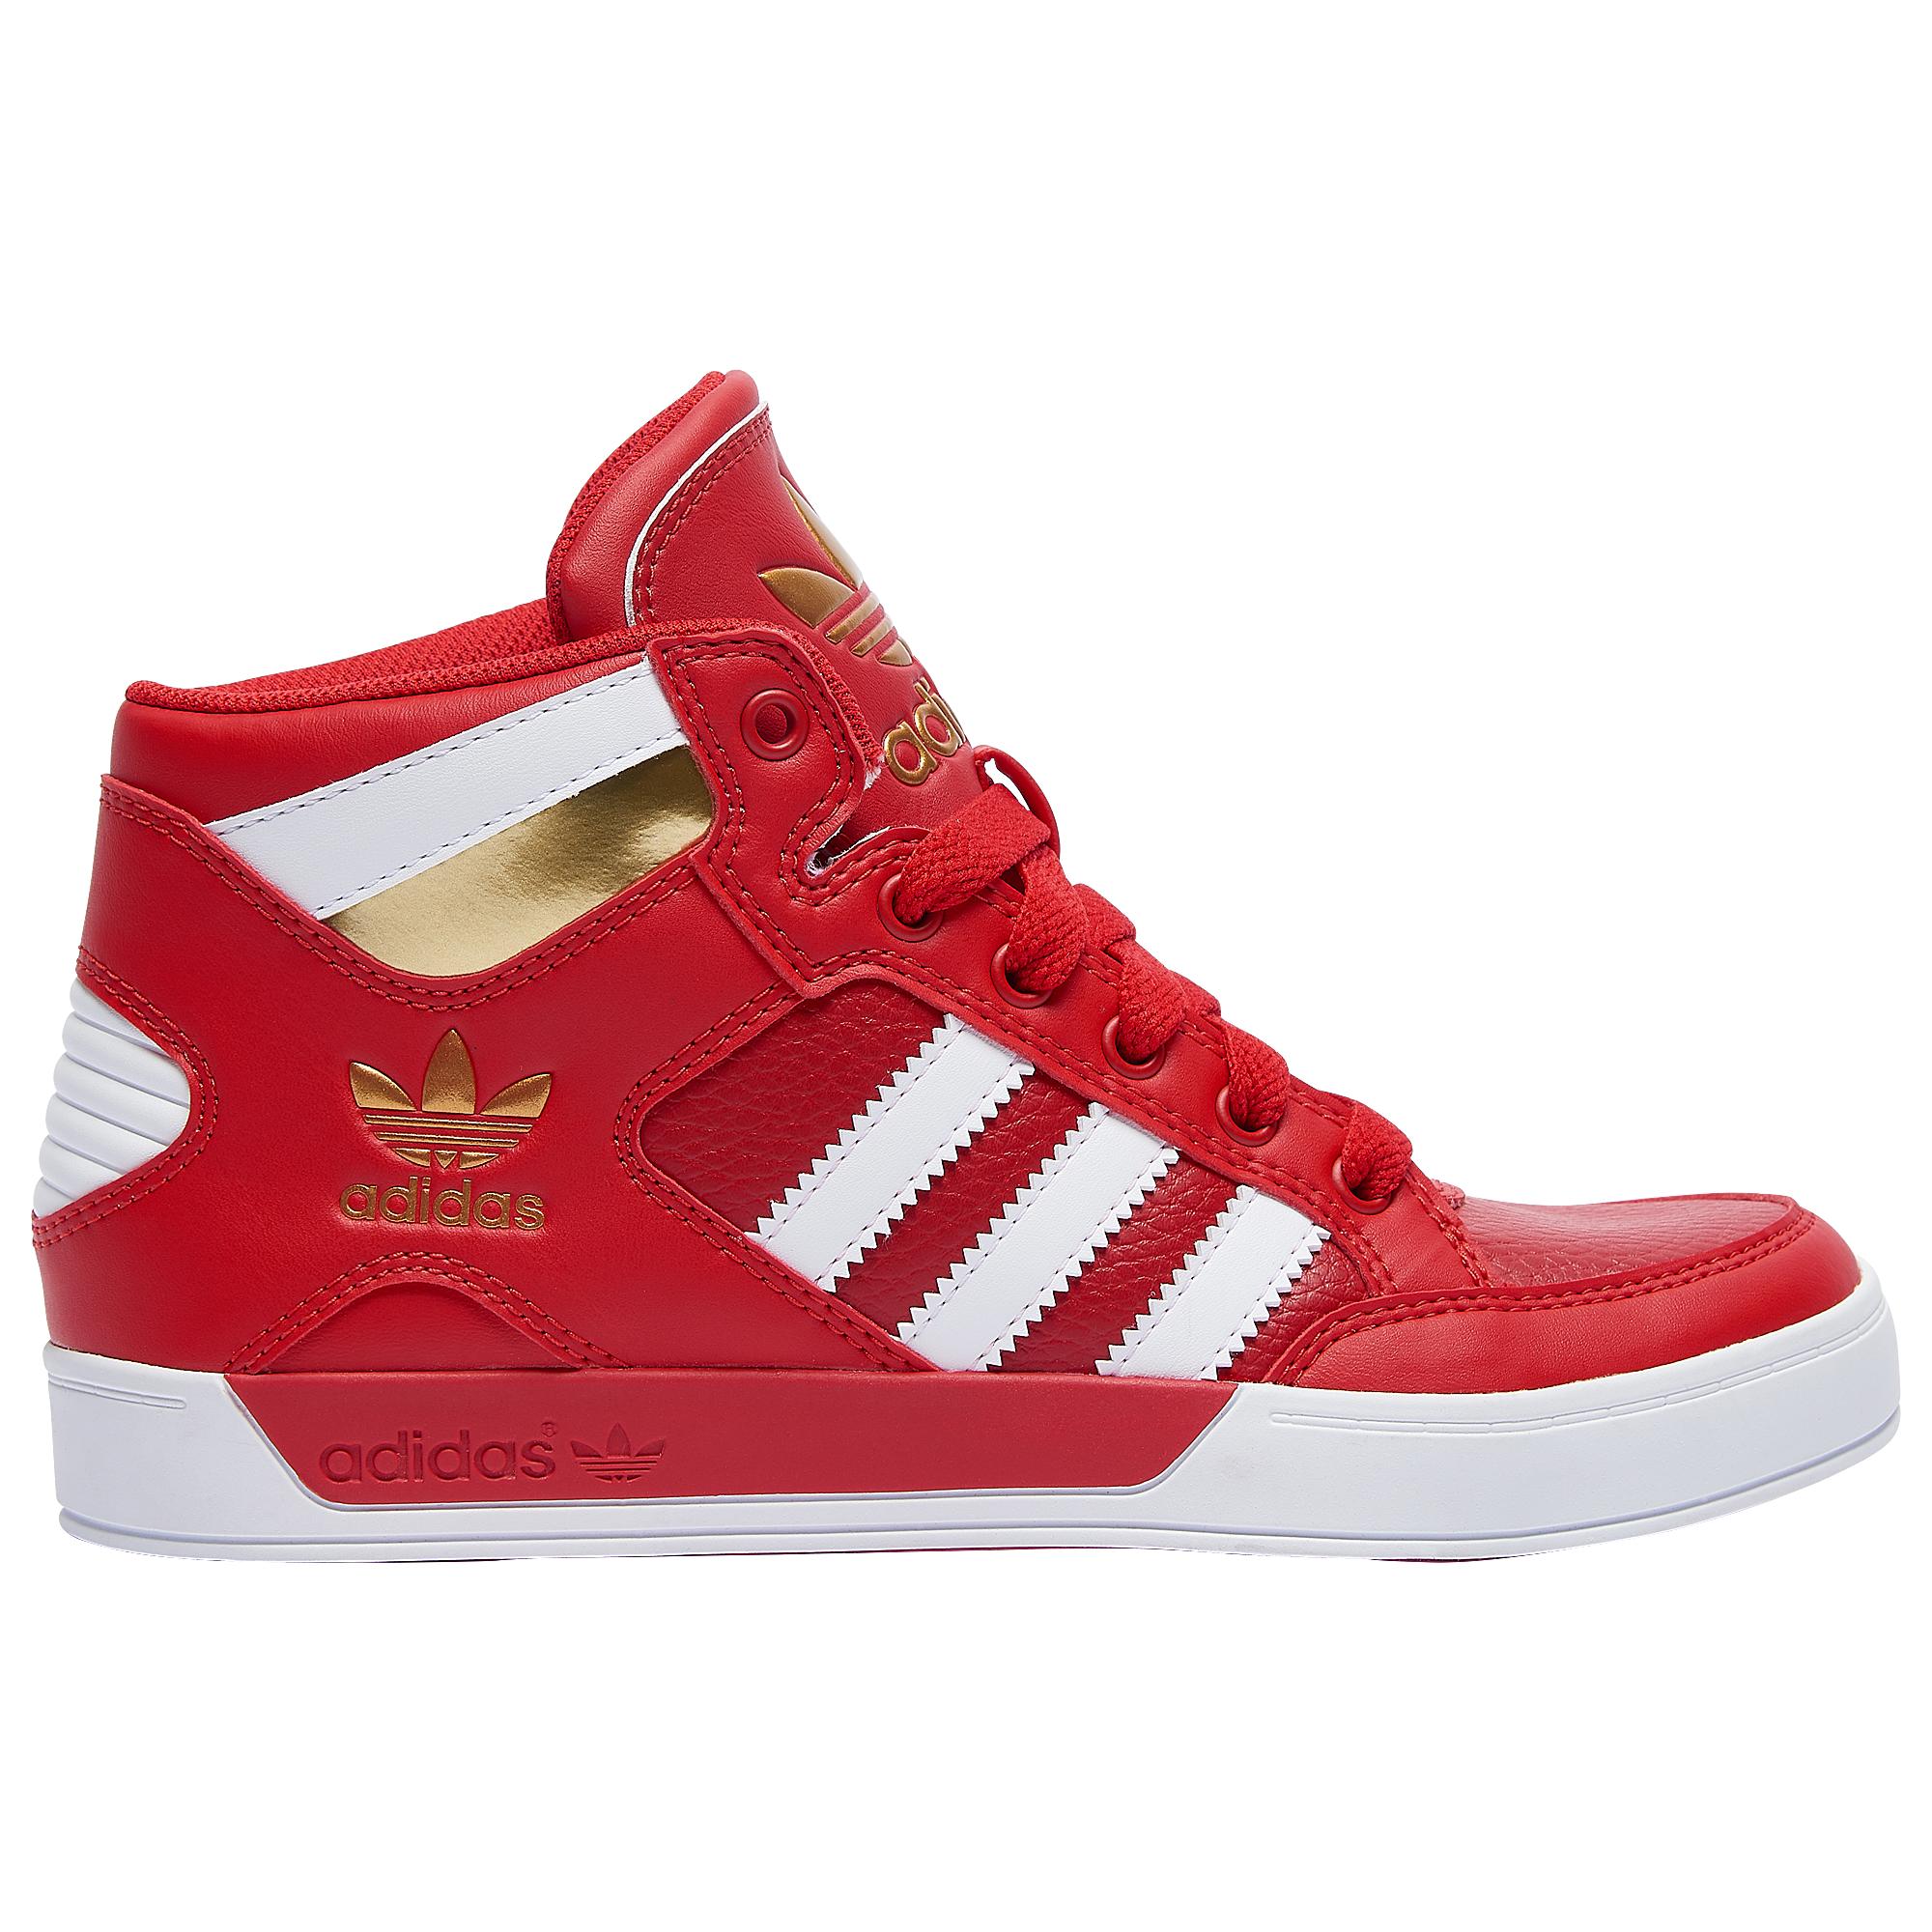 adidas Originals Rubber Hardcourt Hi Tennis Shoes in Red/White/Gold (Red)  for Men - Lyst